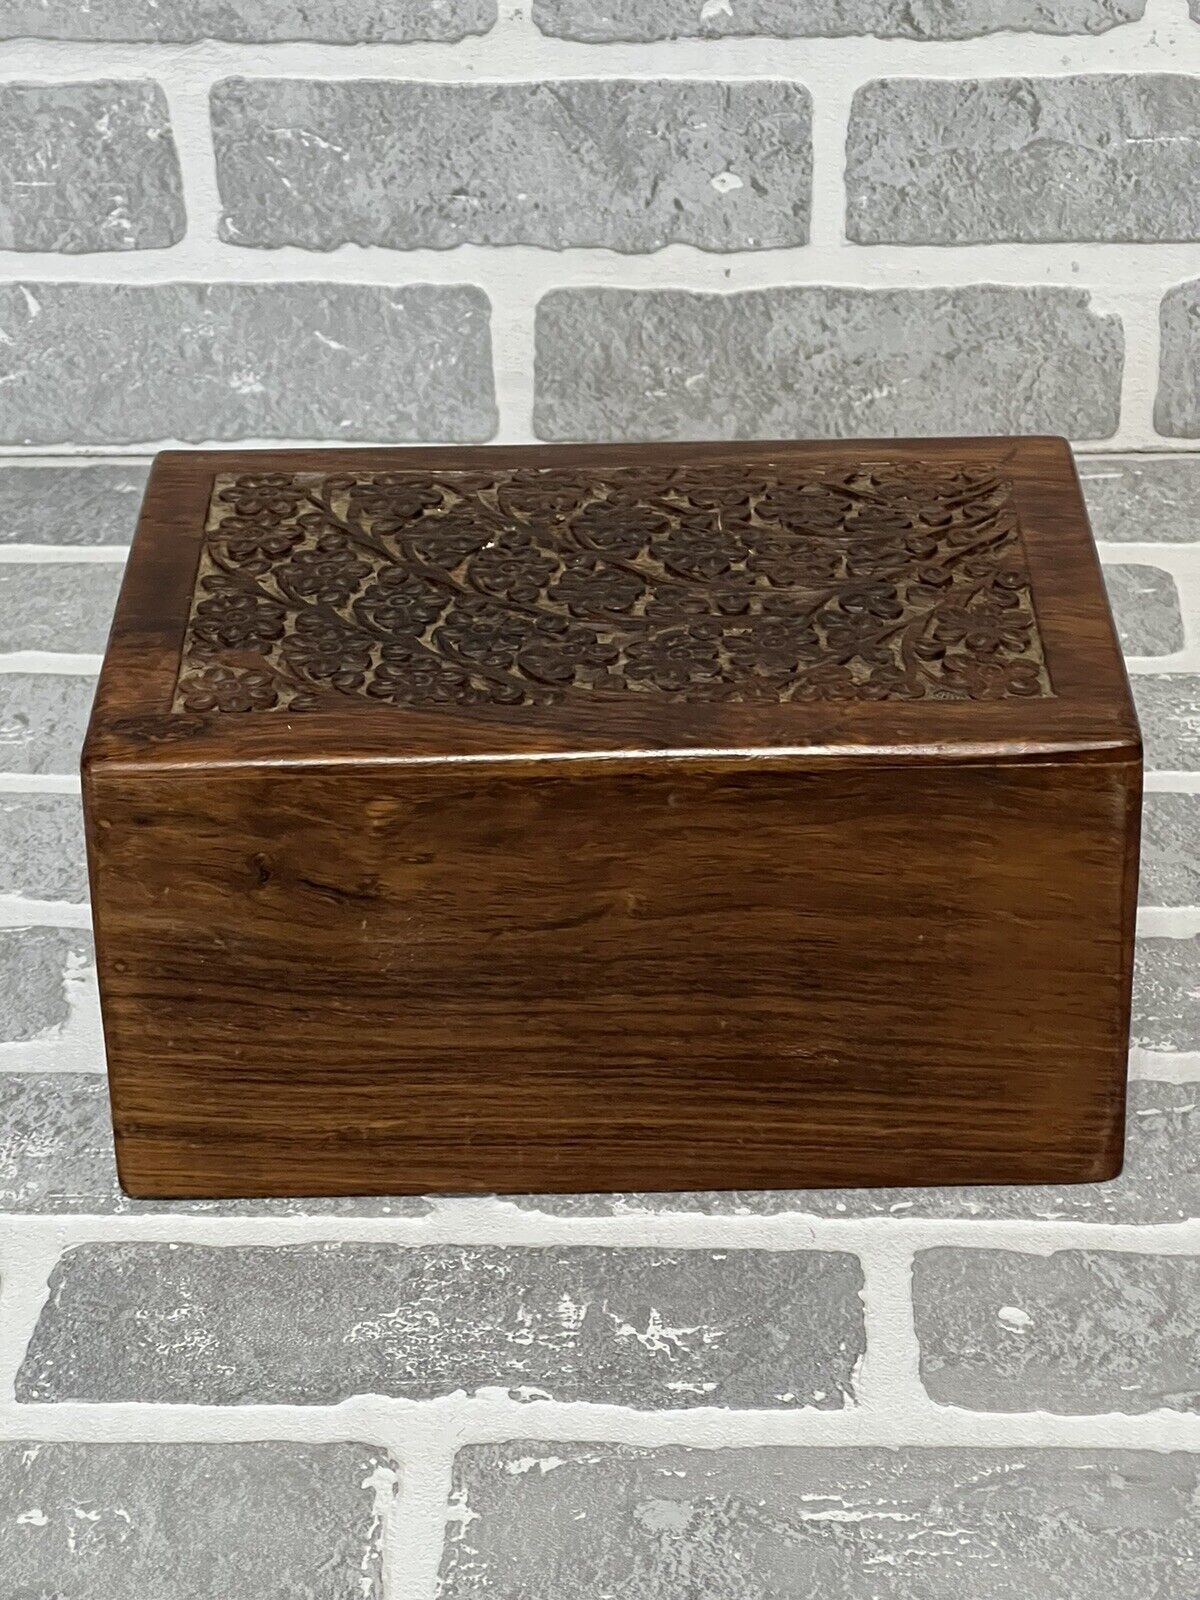 Wood Box Floral Carved Top Bottom Opening